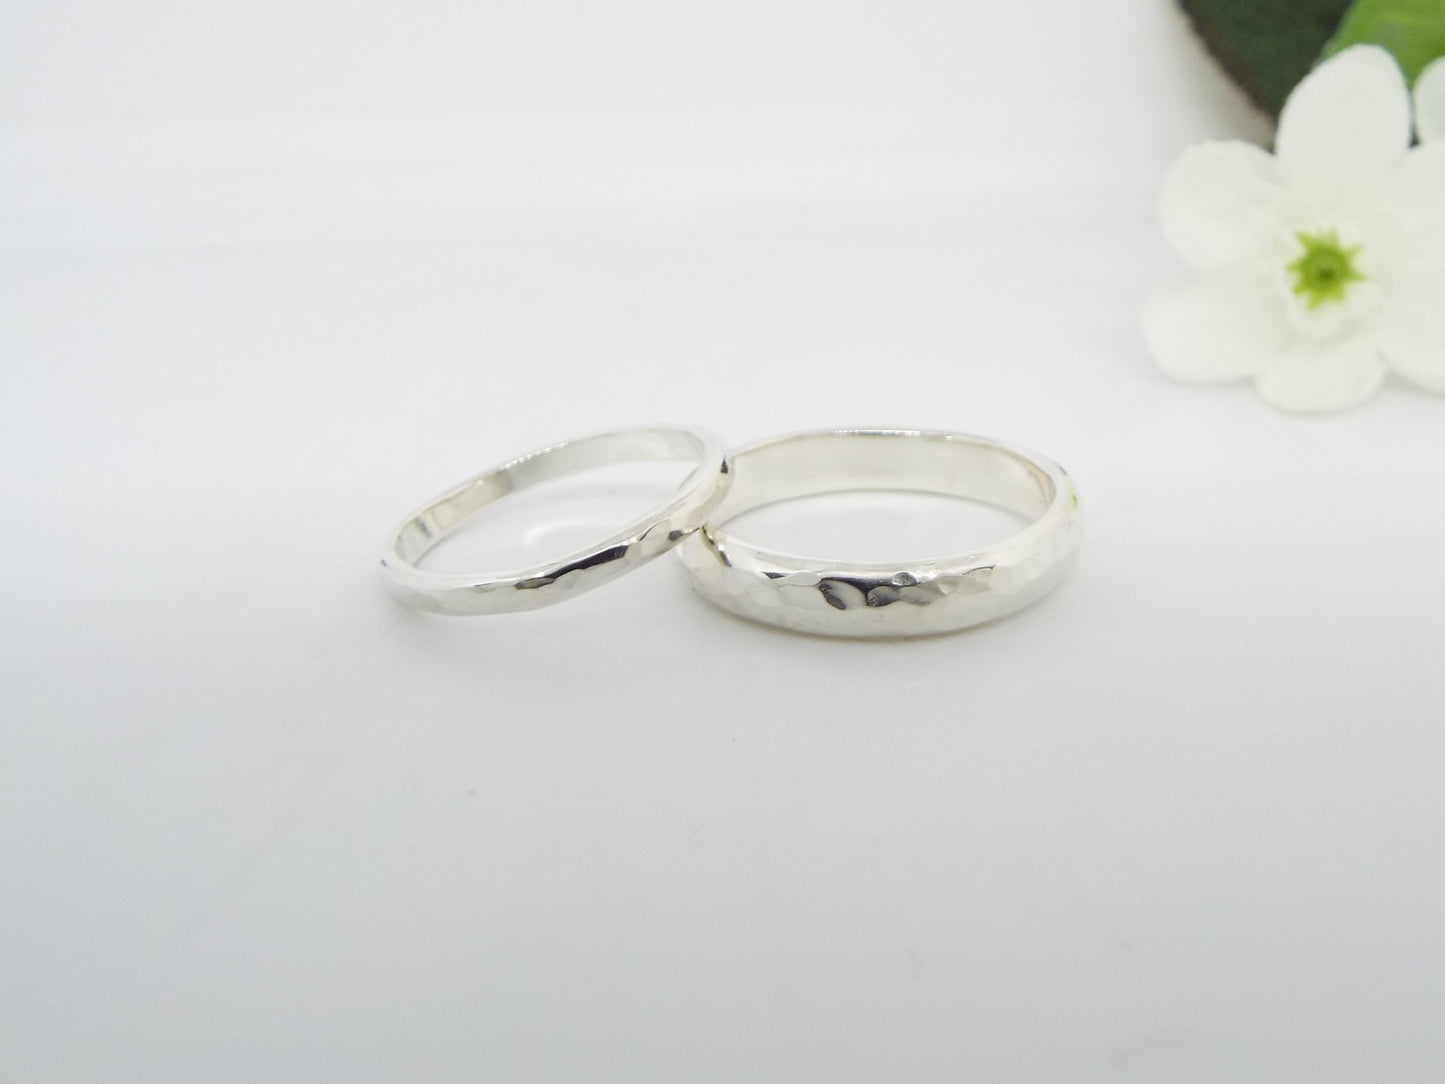 Silver Ring Set - D shaped - Hammered finish